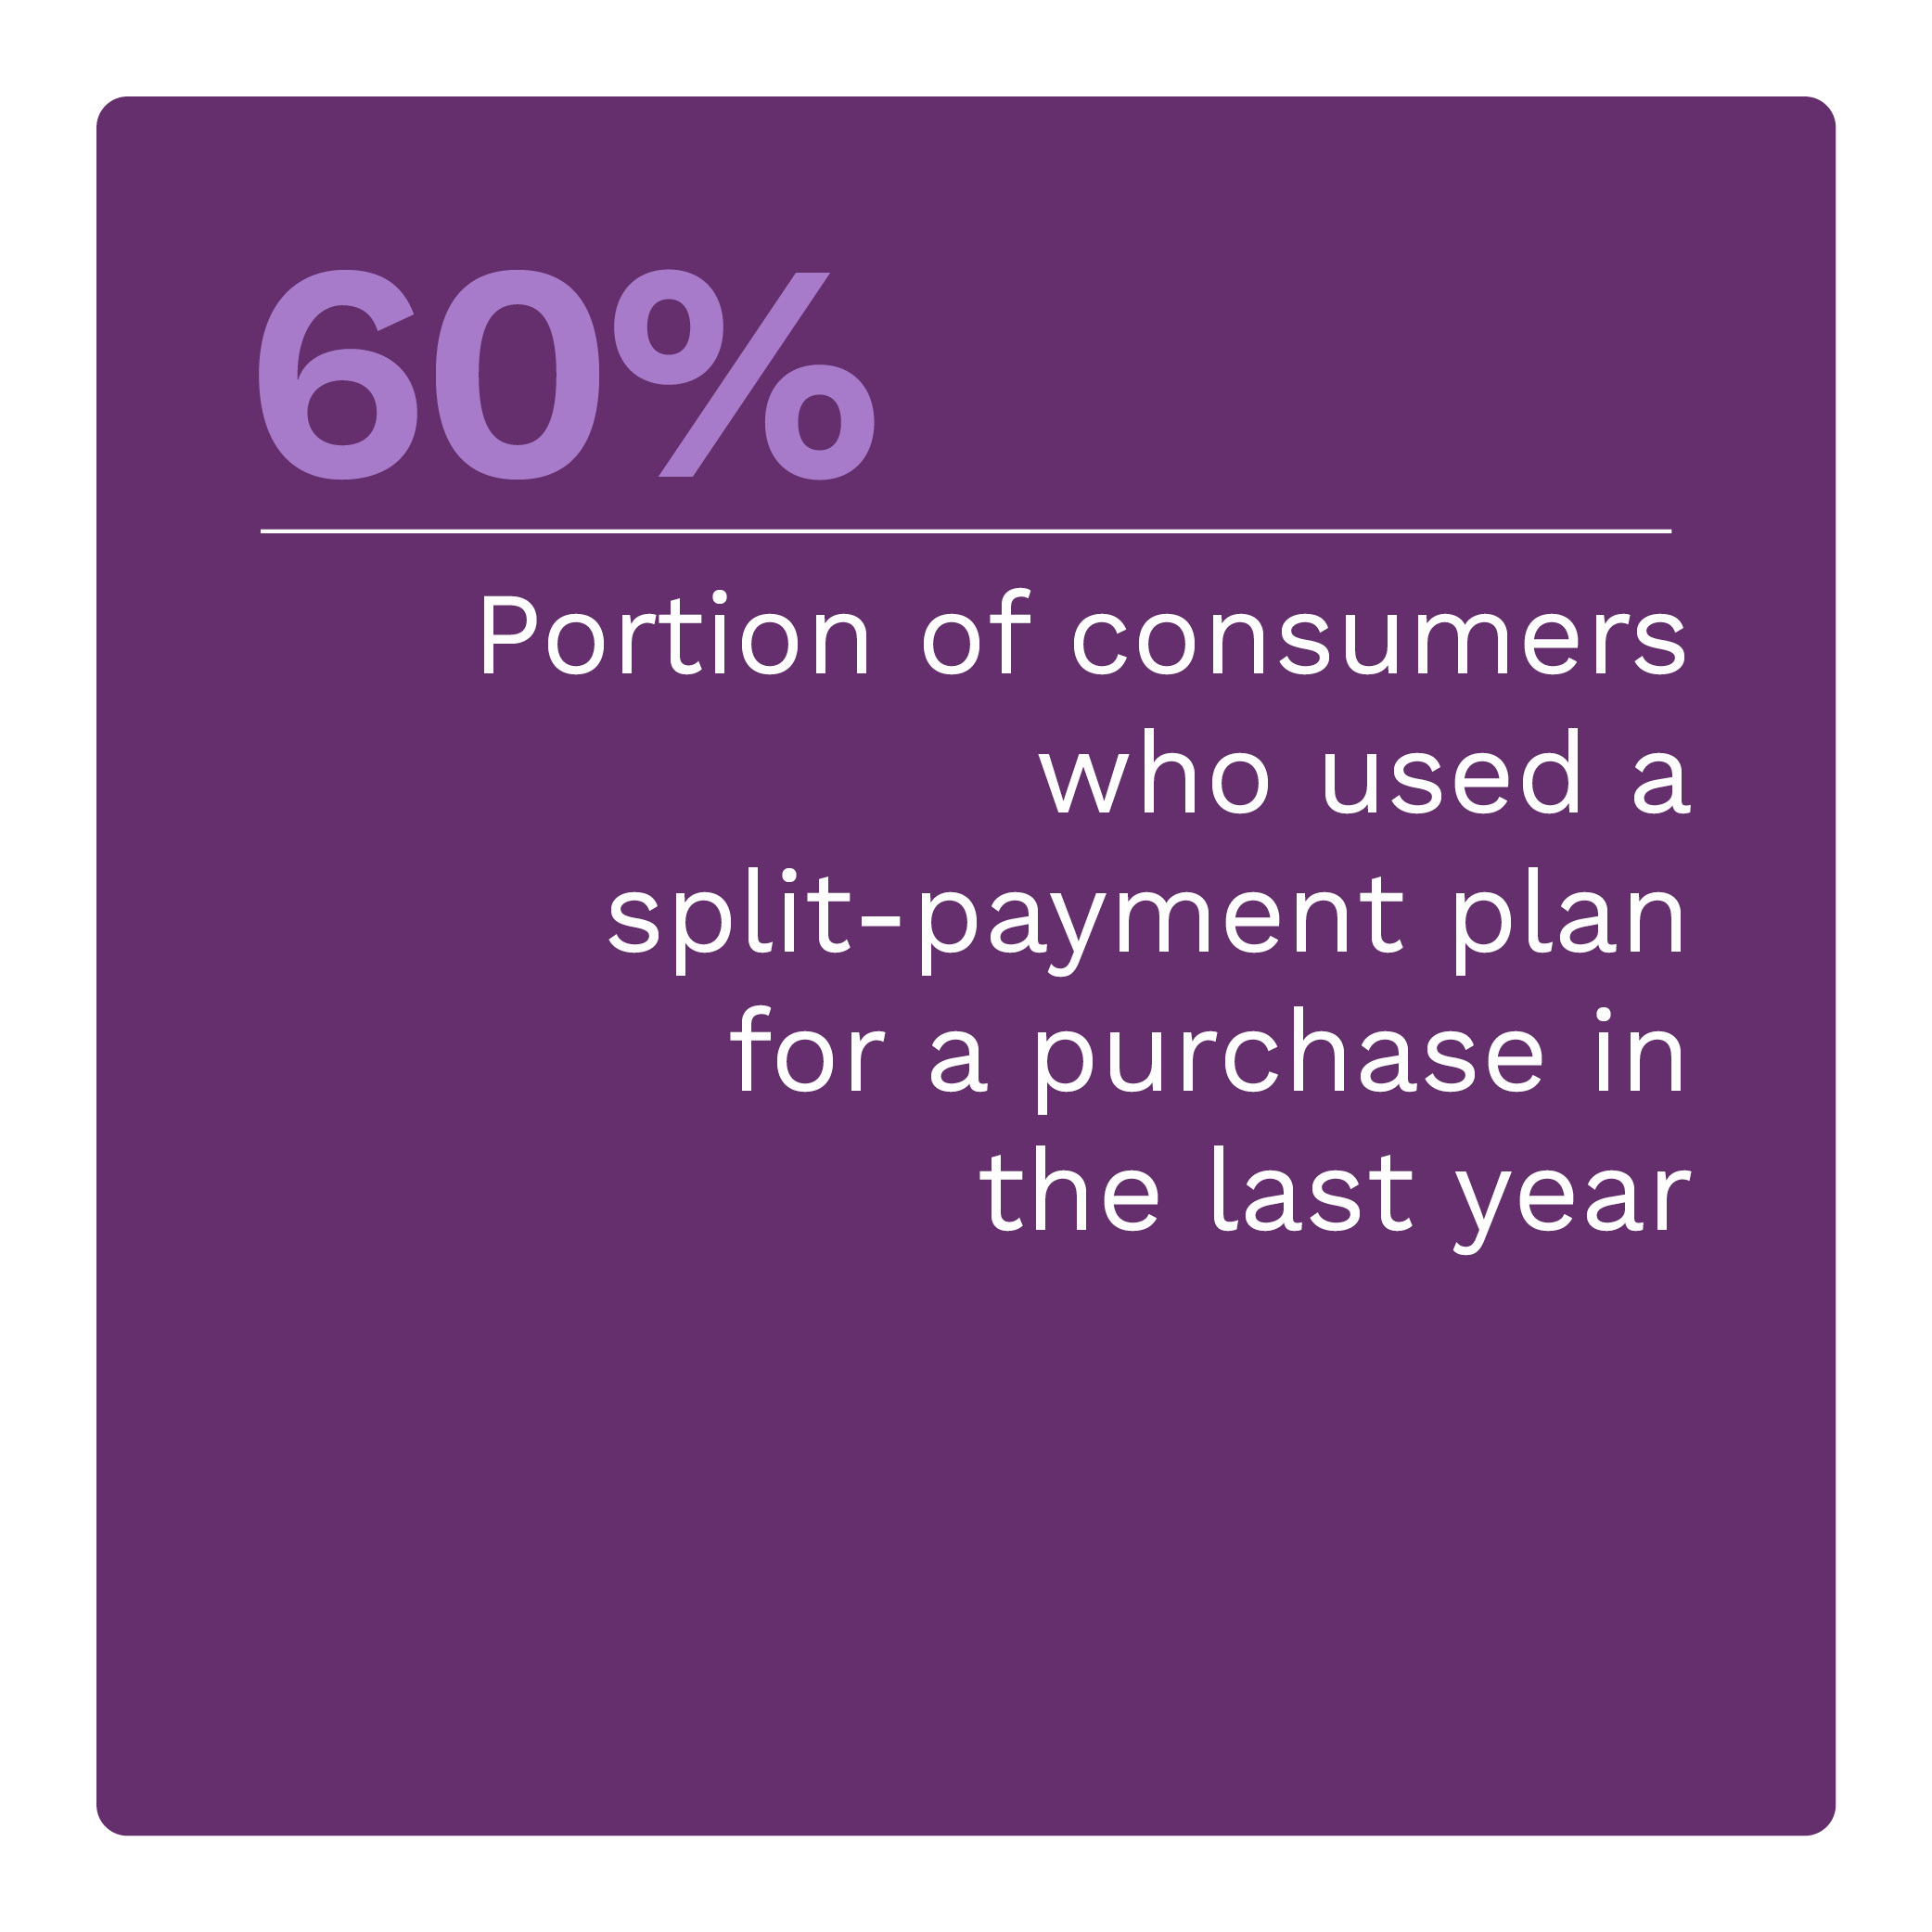 60%: Portion of consumers who used a split-payment plan for a purchase in the last year